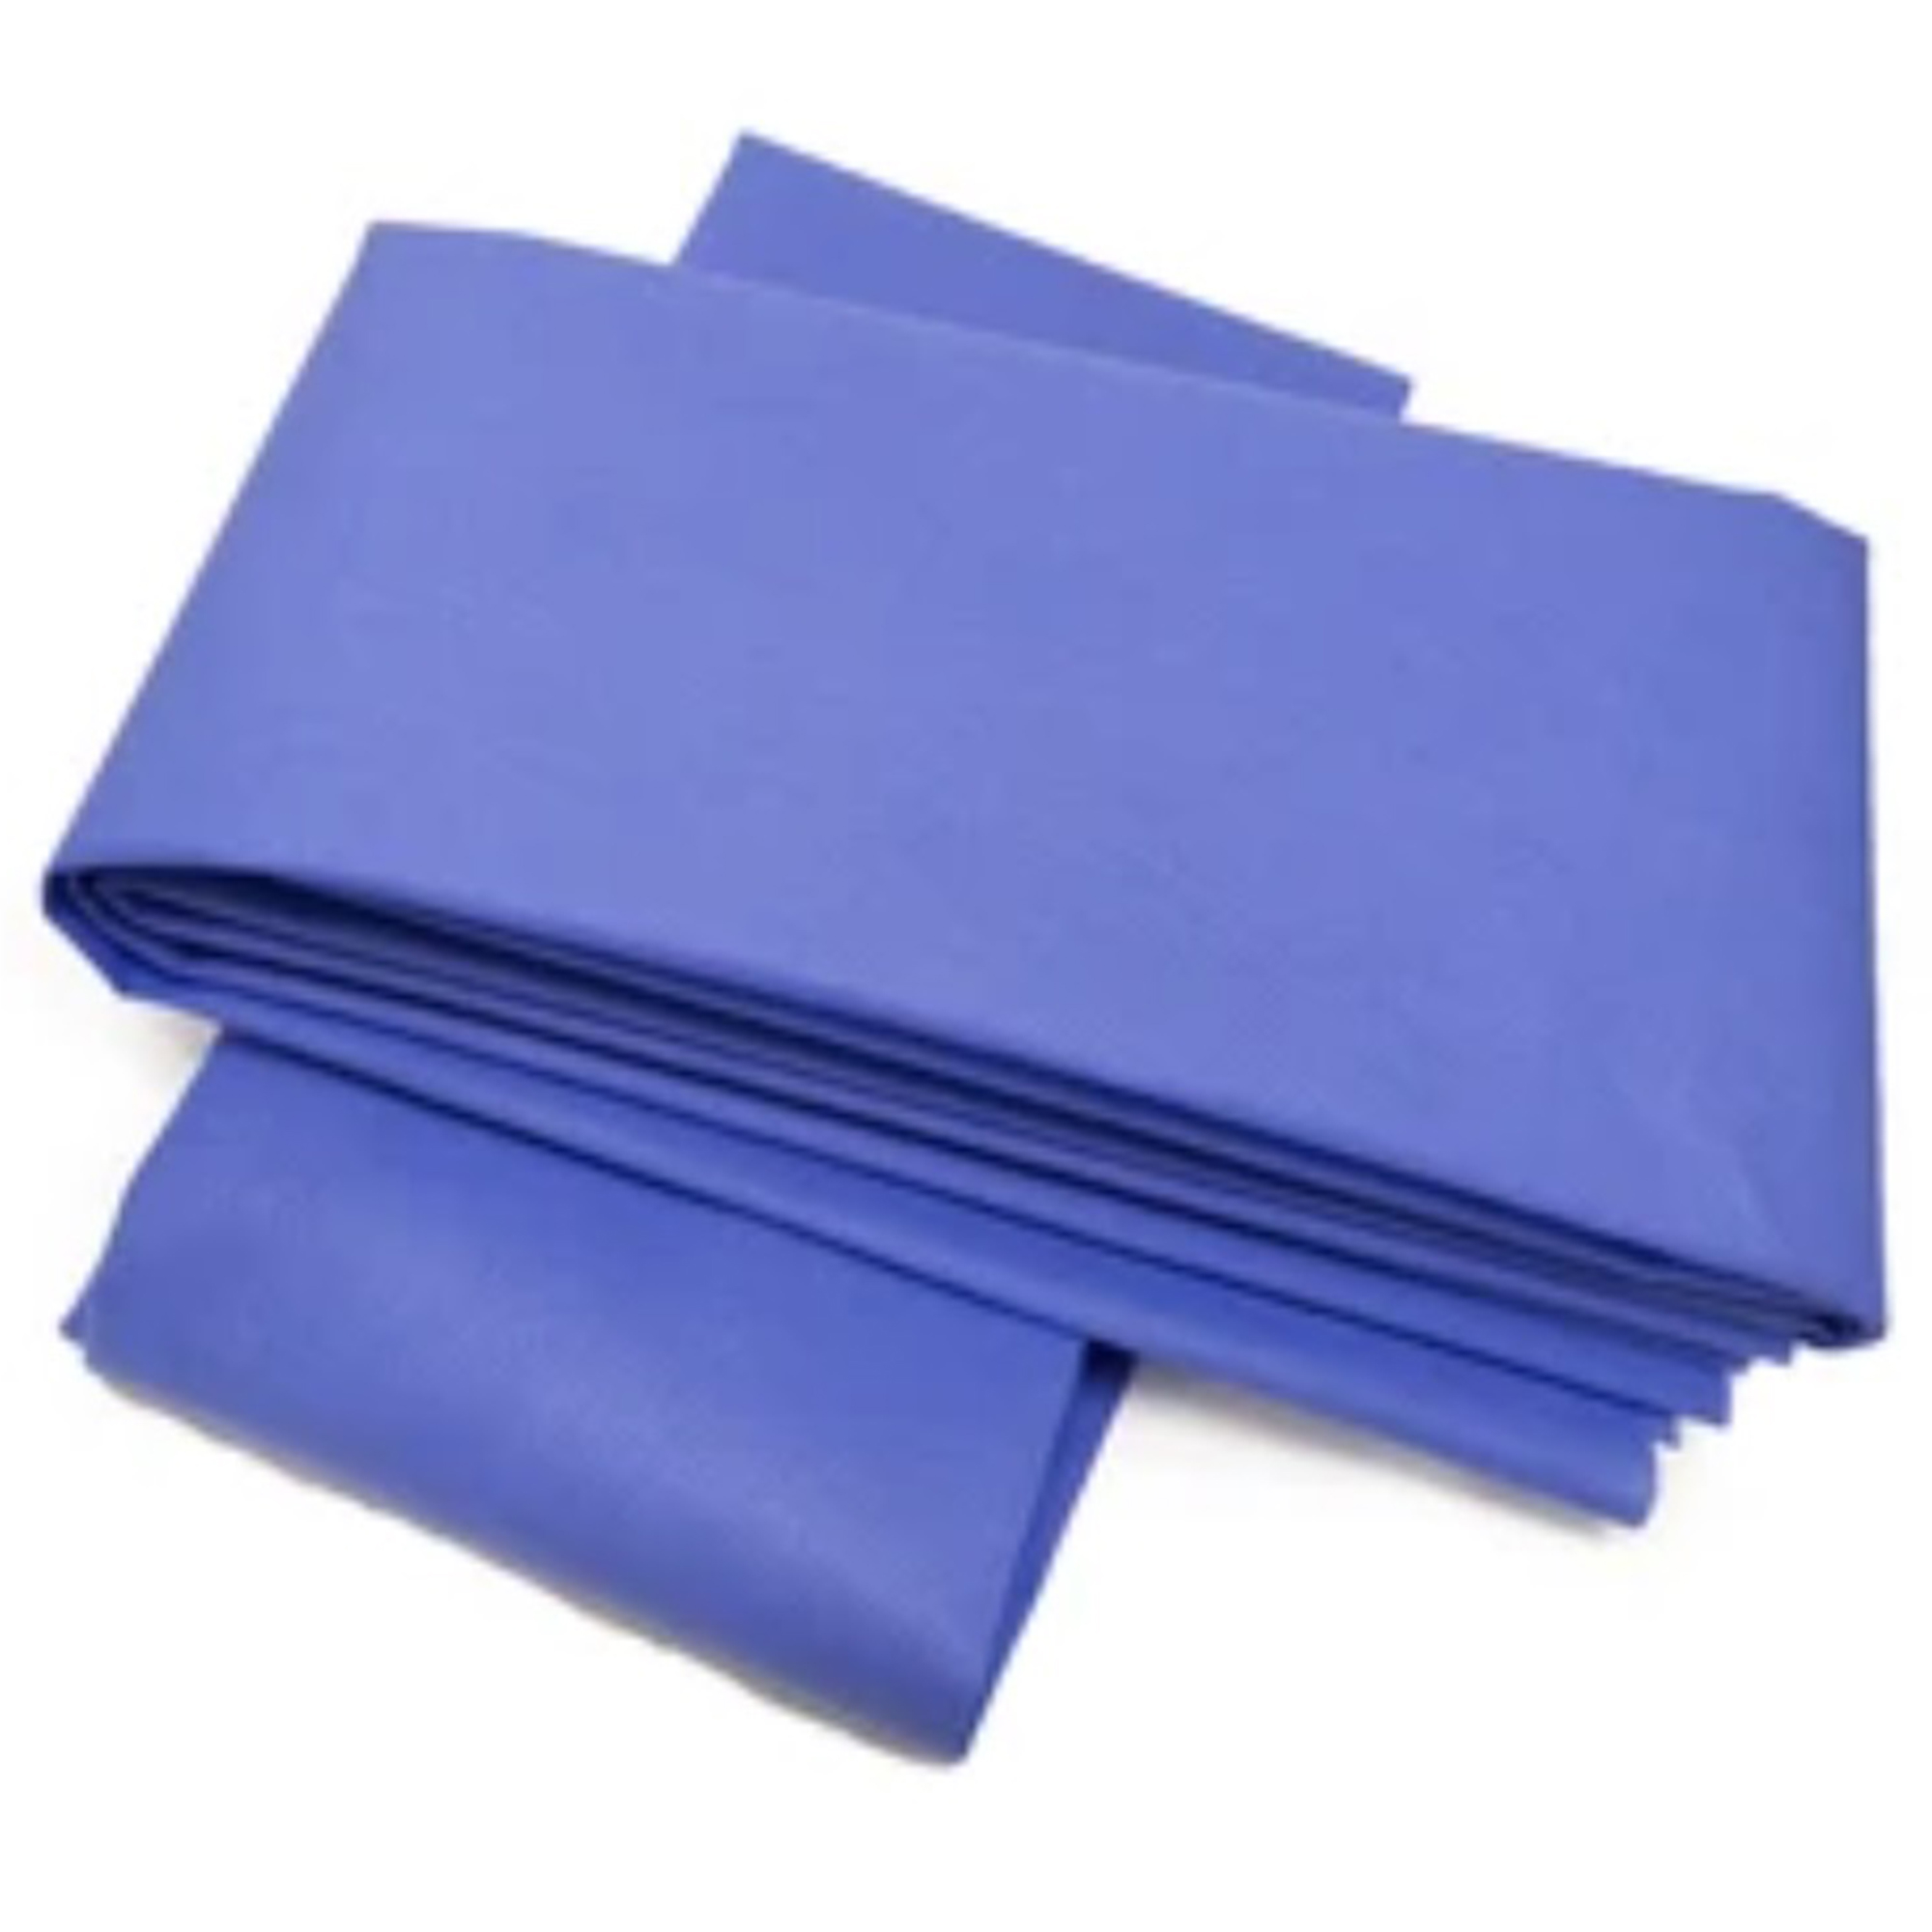 Medical practice/SURGERY/Kits & Surgical Drapes